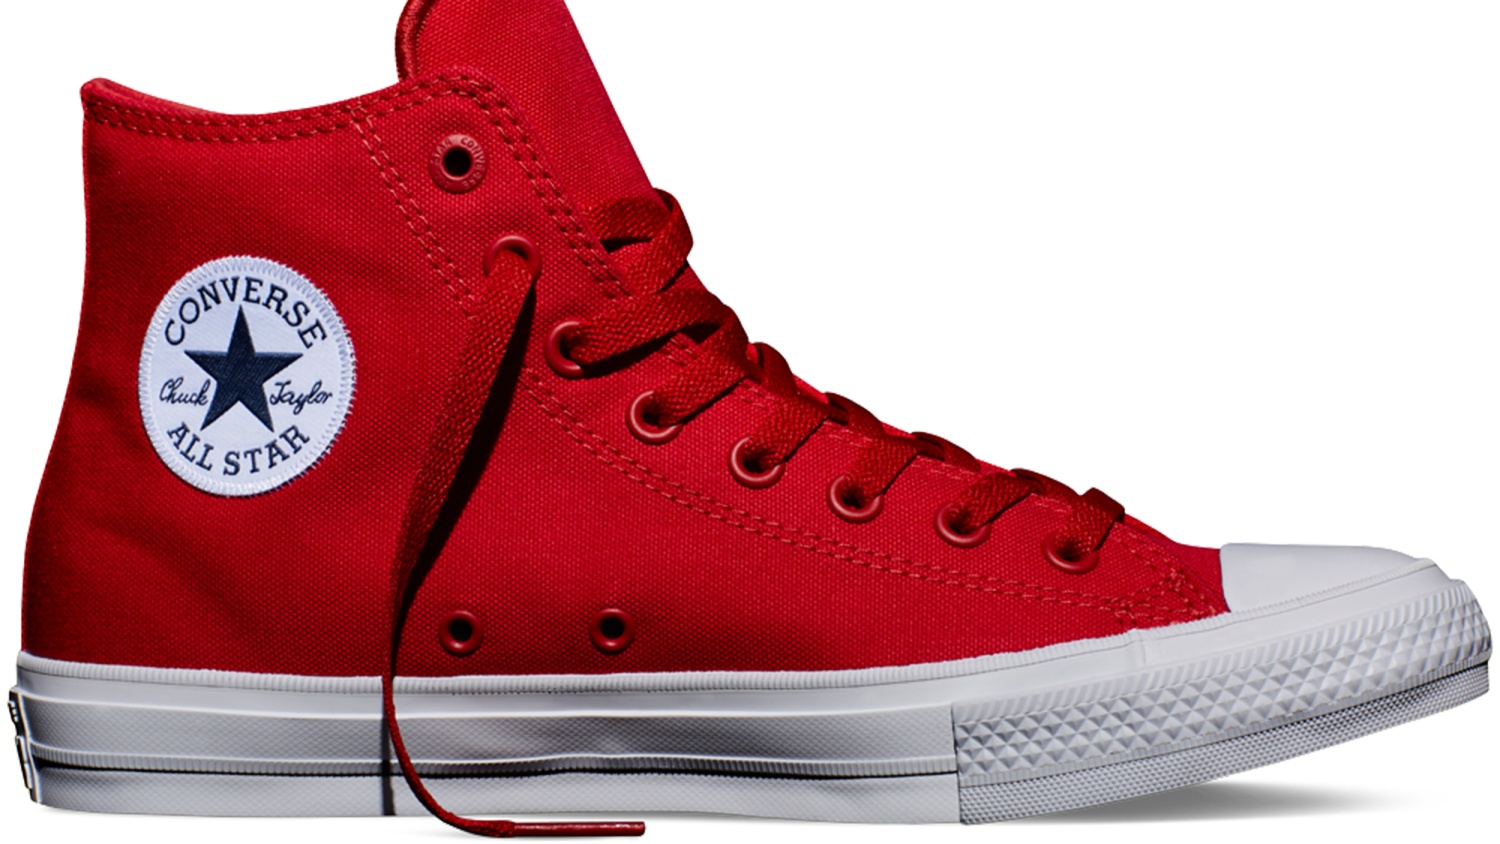 Converse unveils the Chuck Taylor II, a makeover of the classic sneakers